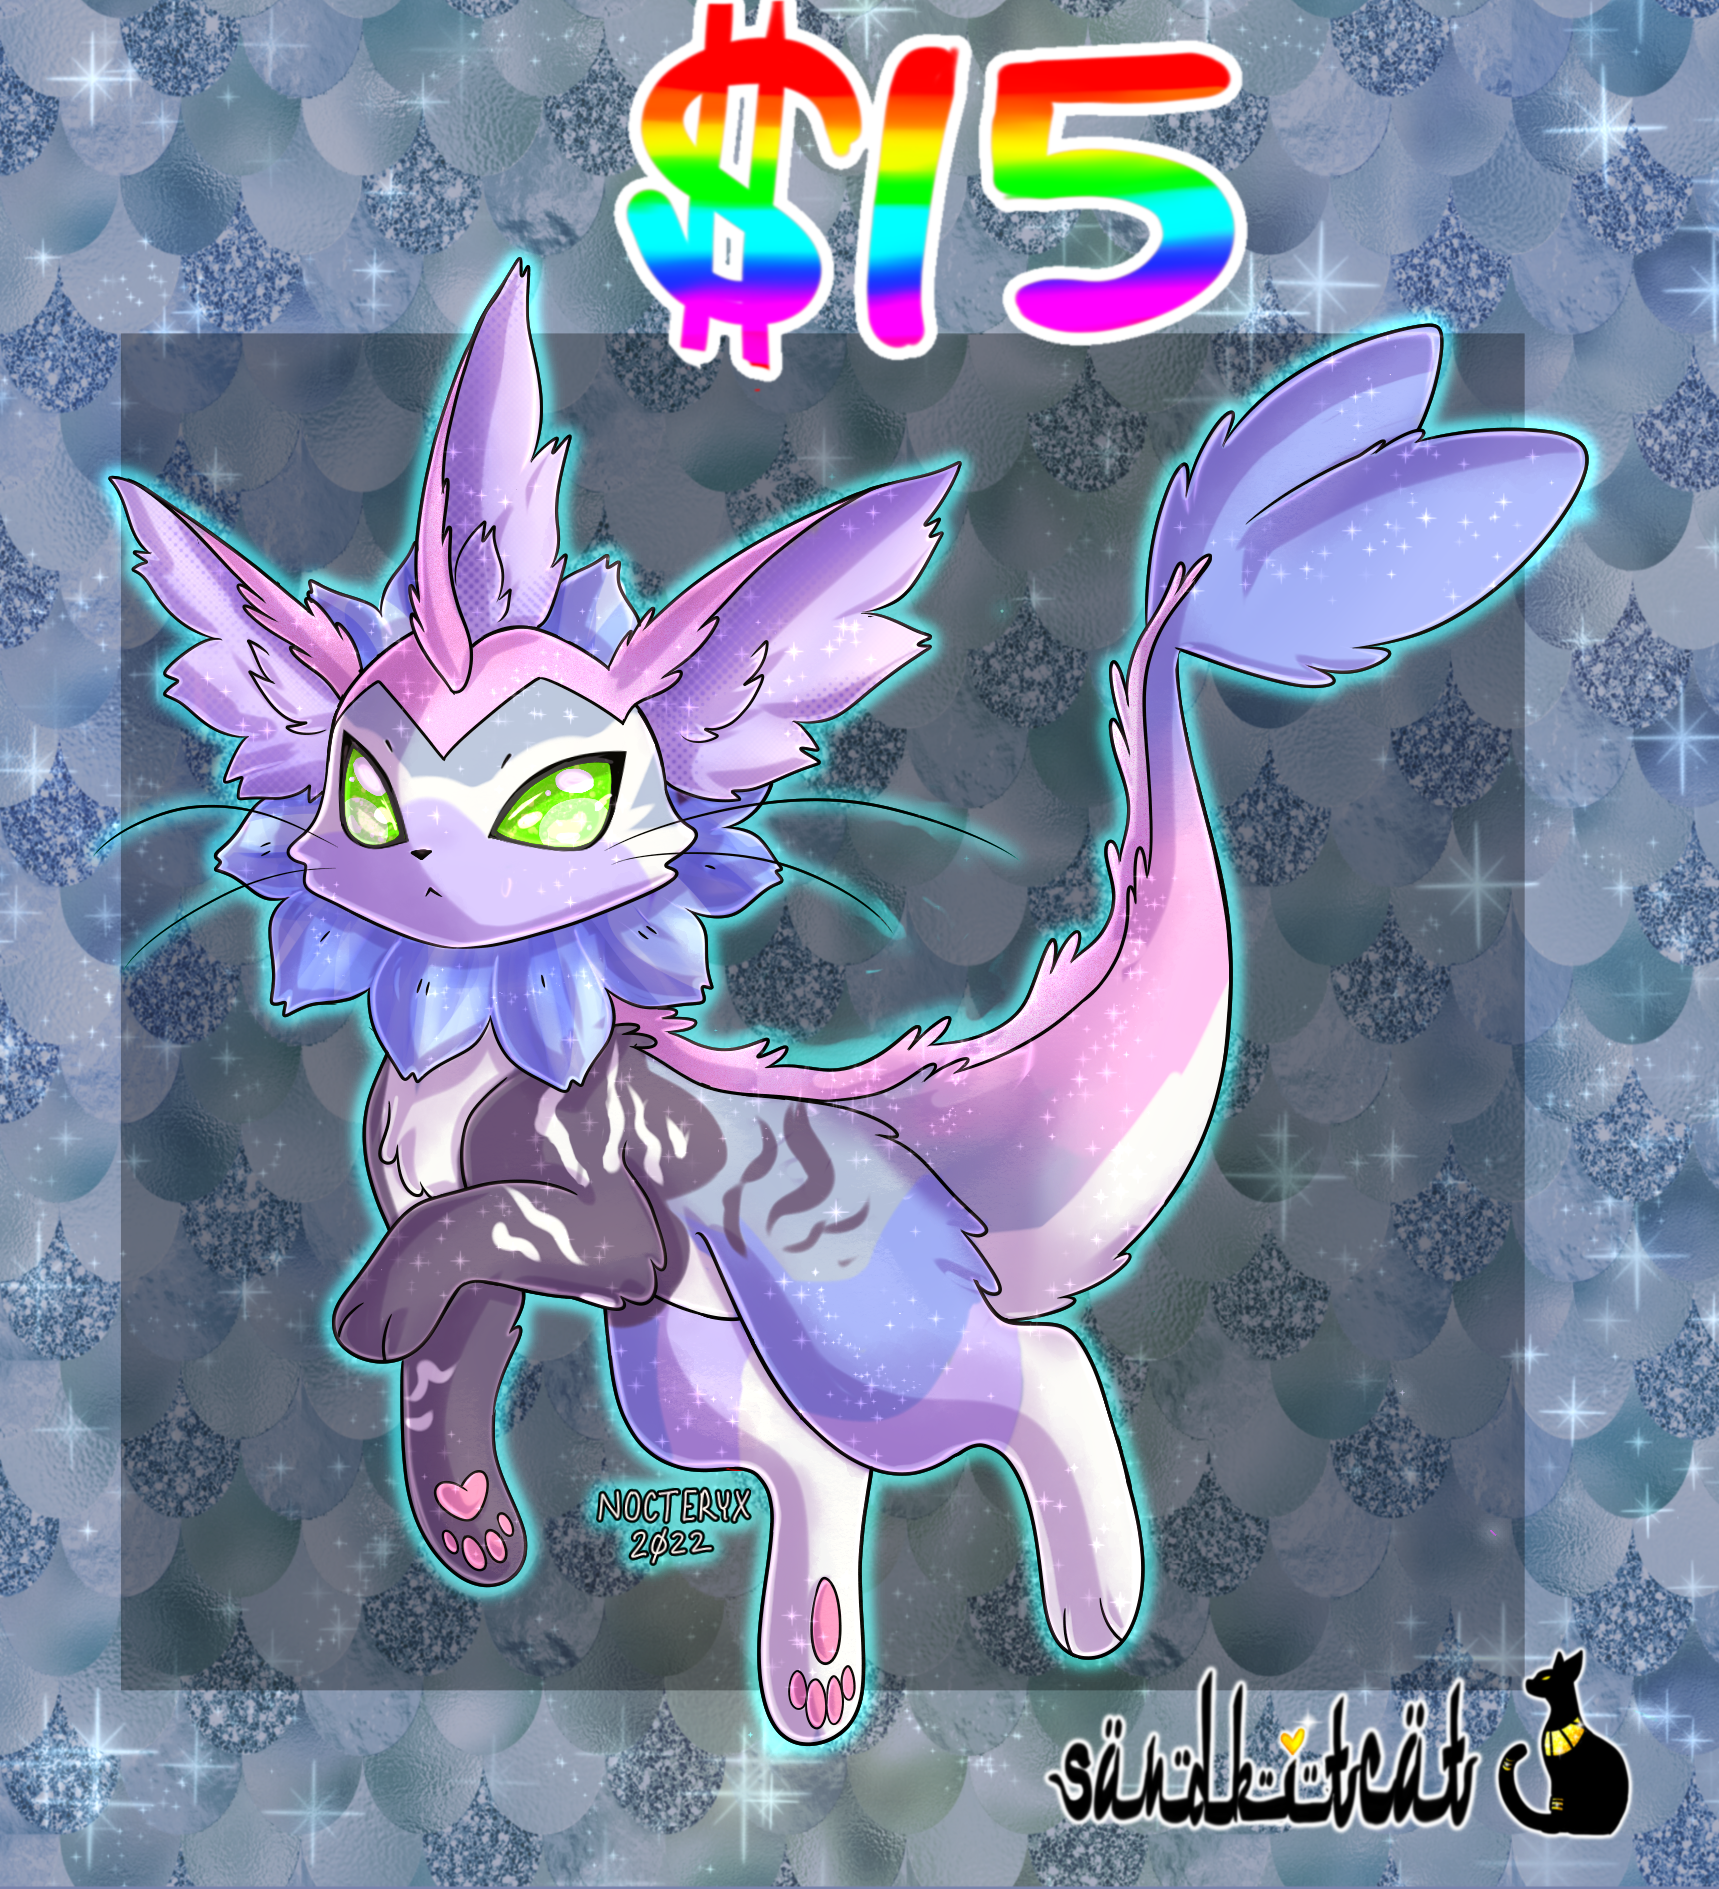 Colors Live - Vaporeon! - But inverted colors by Im_a_Dragon